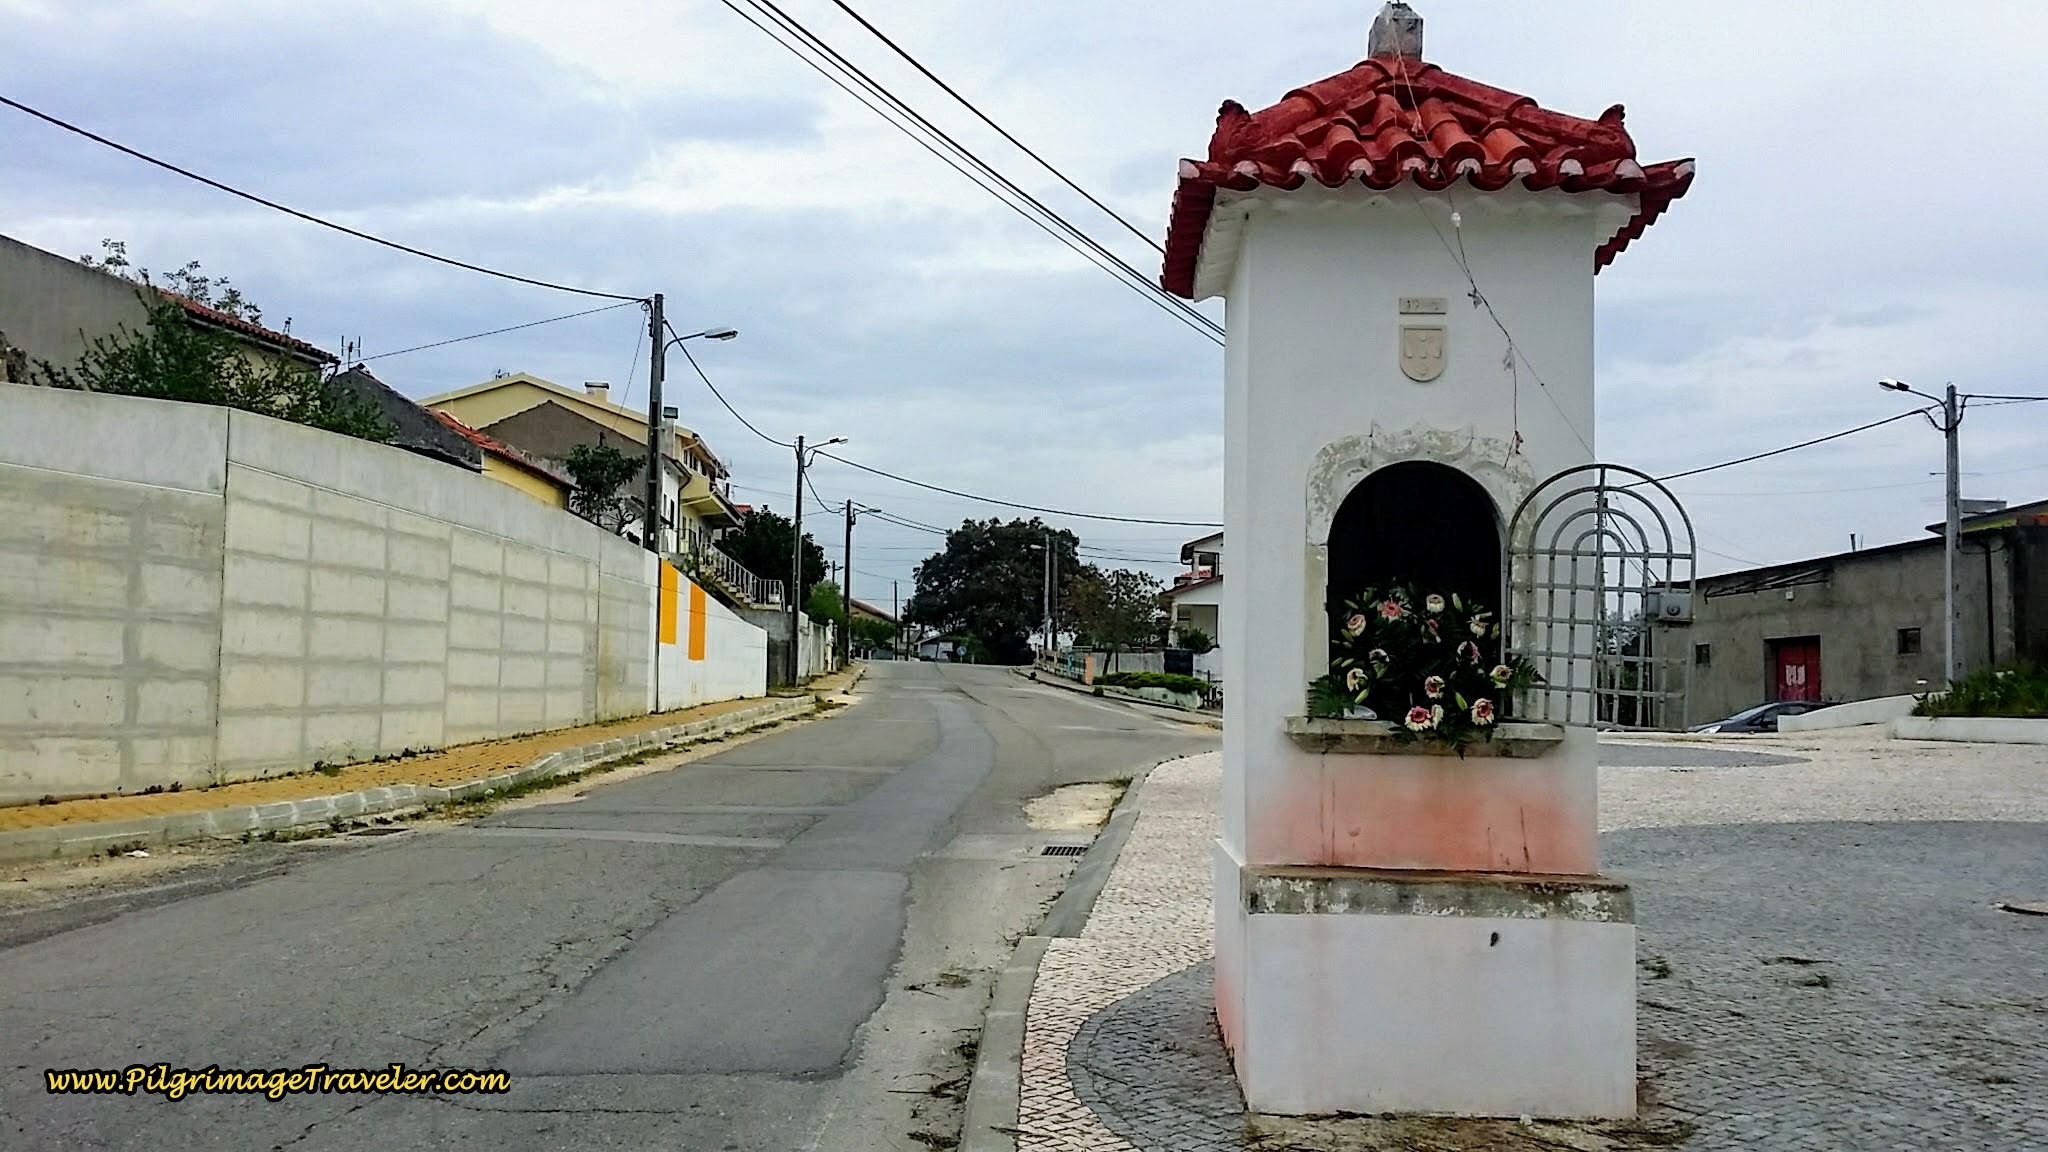 Shrine on the North Side of Trouxemil, on day ten of the Portuguese Camino